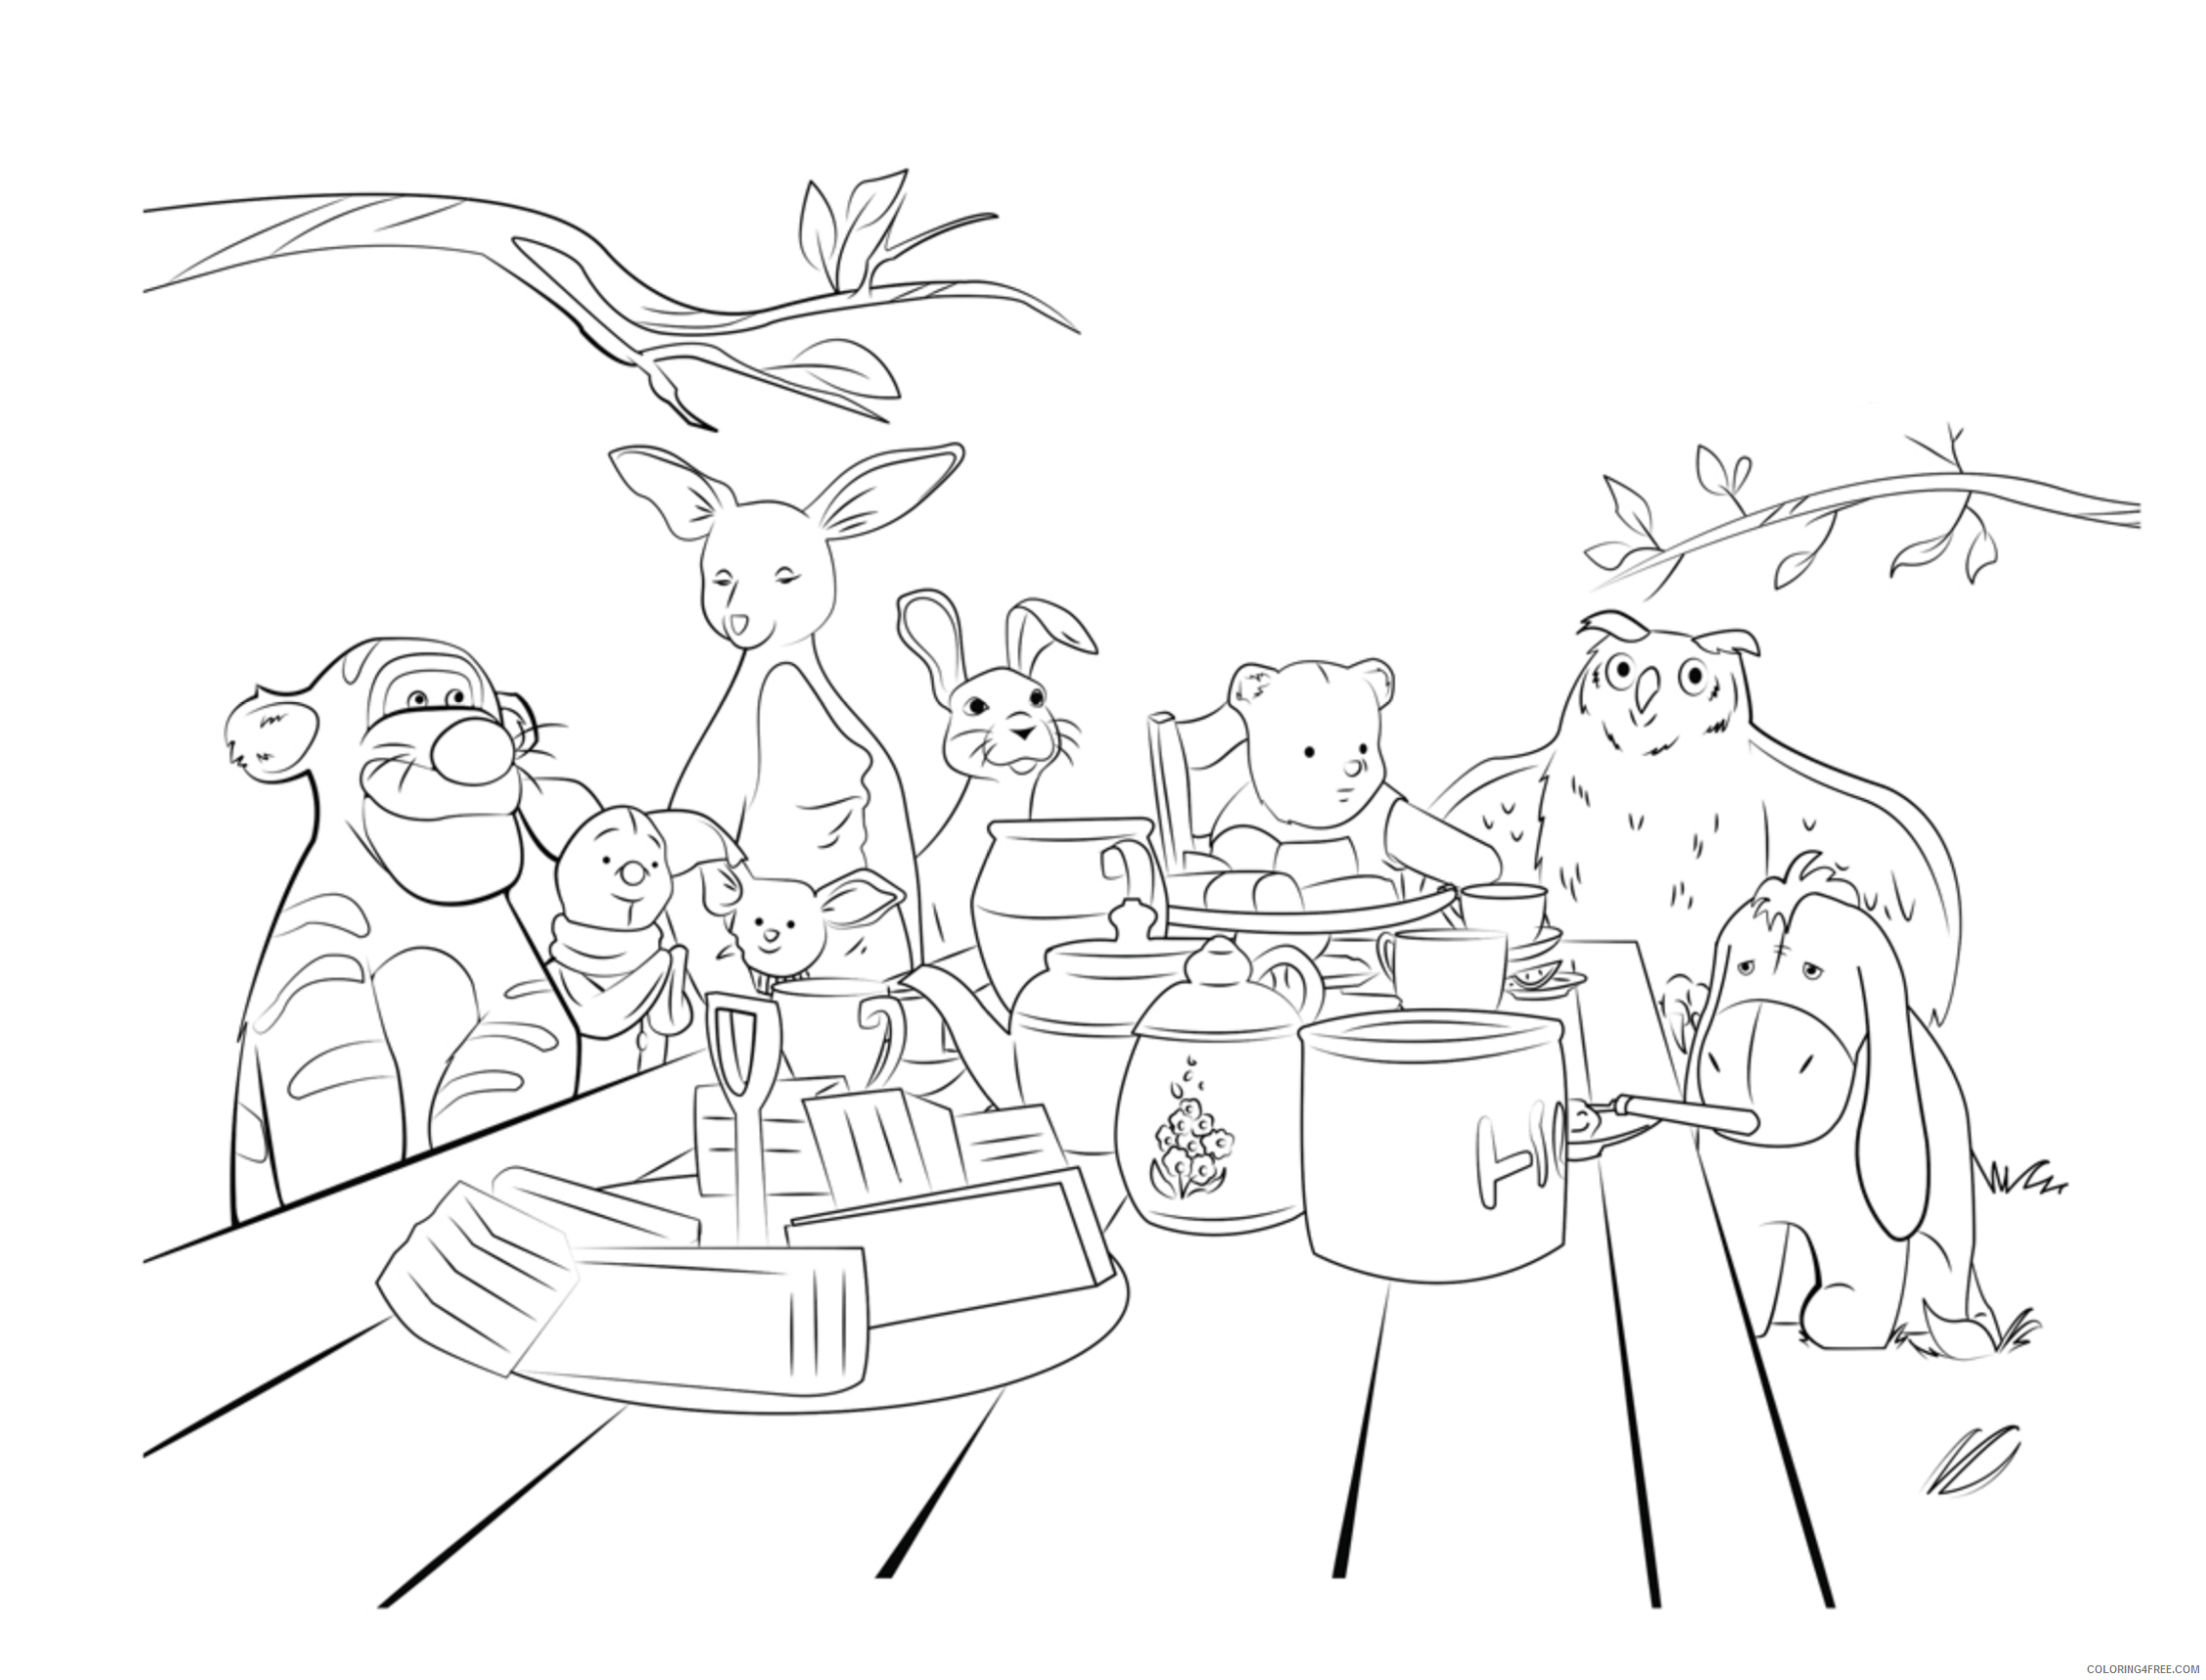 Winnie the Pooh Coloring Pages Cartoons Pooh Disney for Adults Printable 2020 7003 Coloring4free